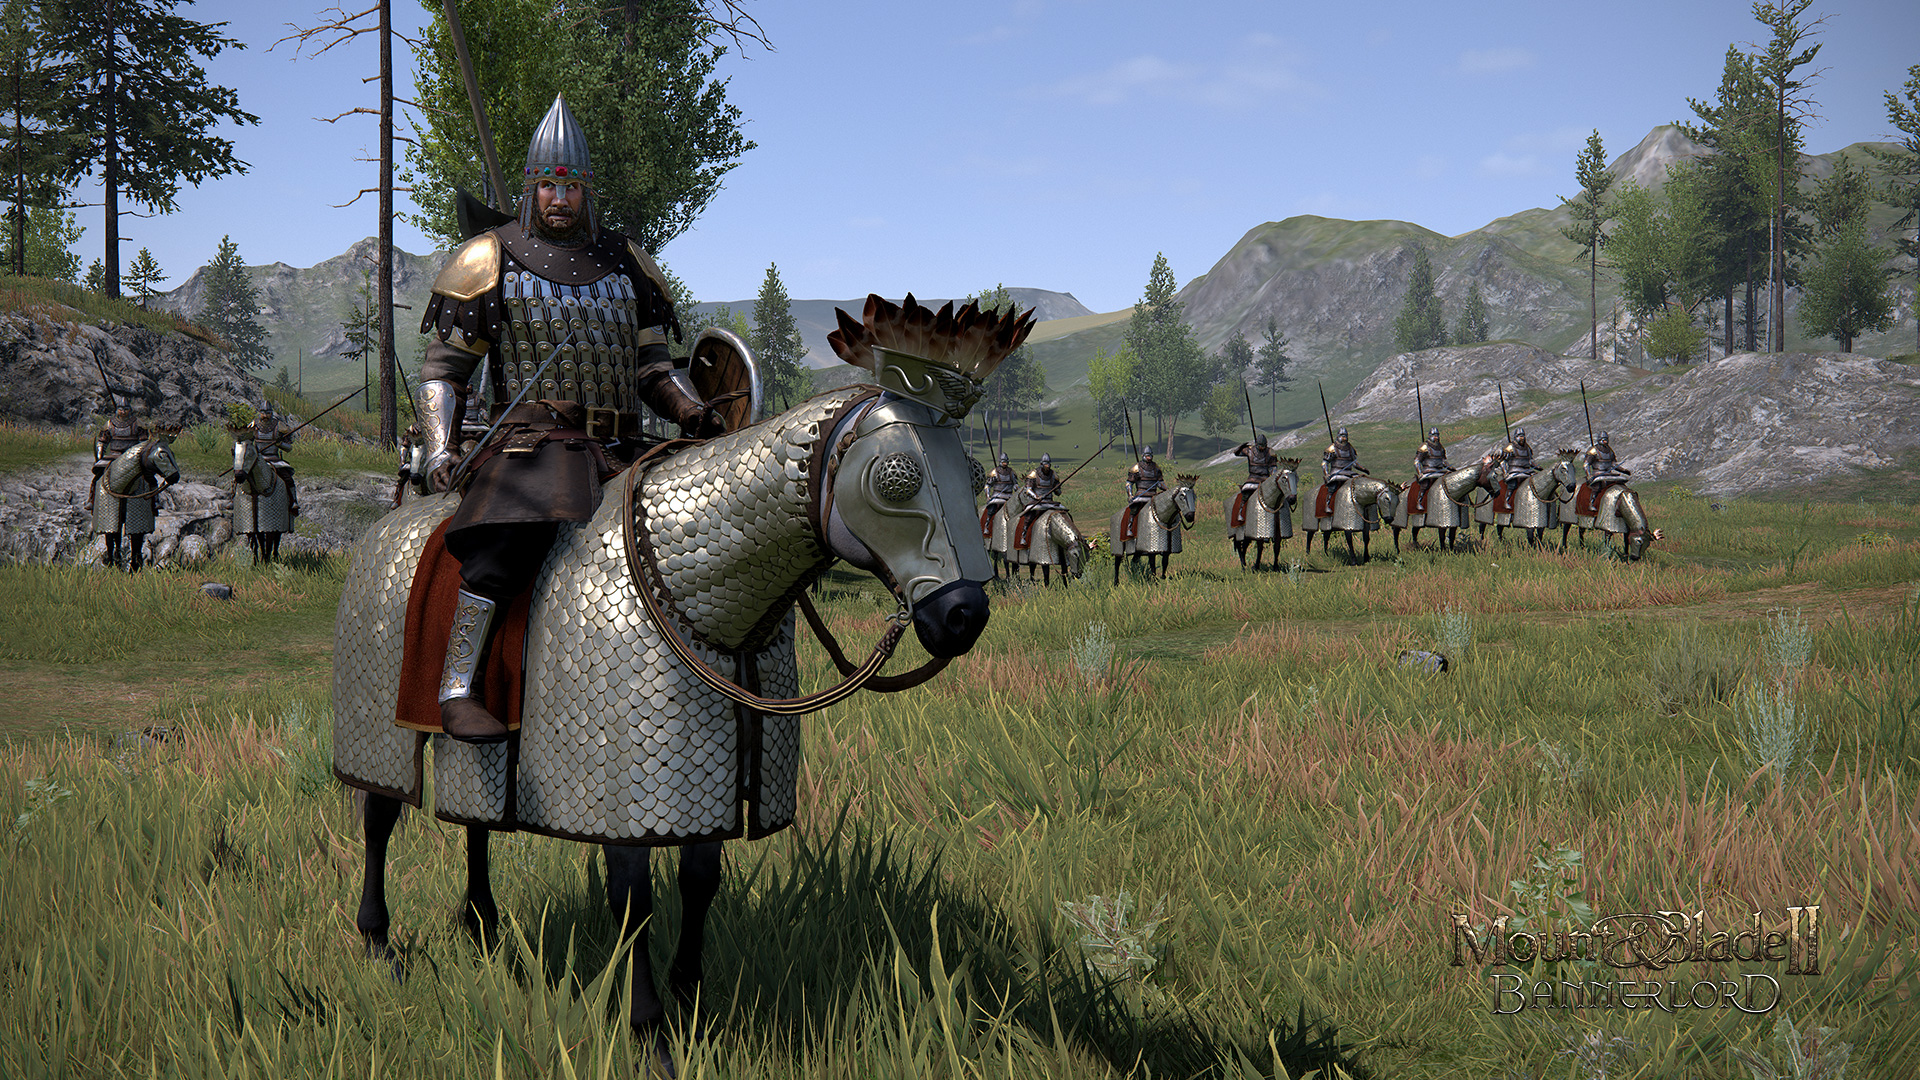 mount blade 2 bannerlord